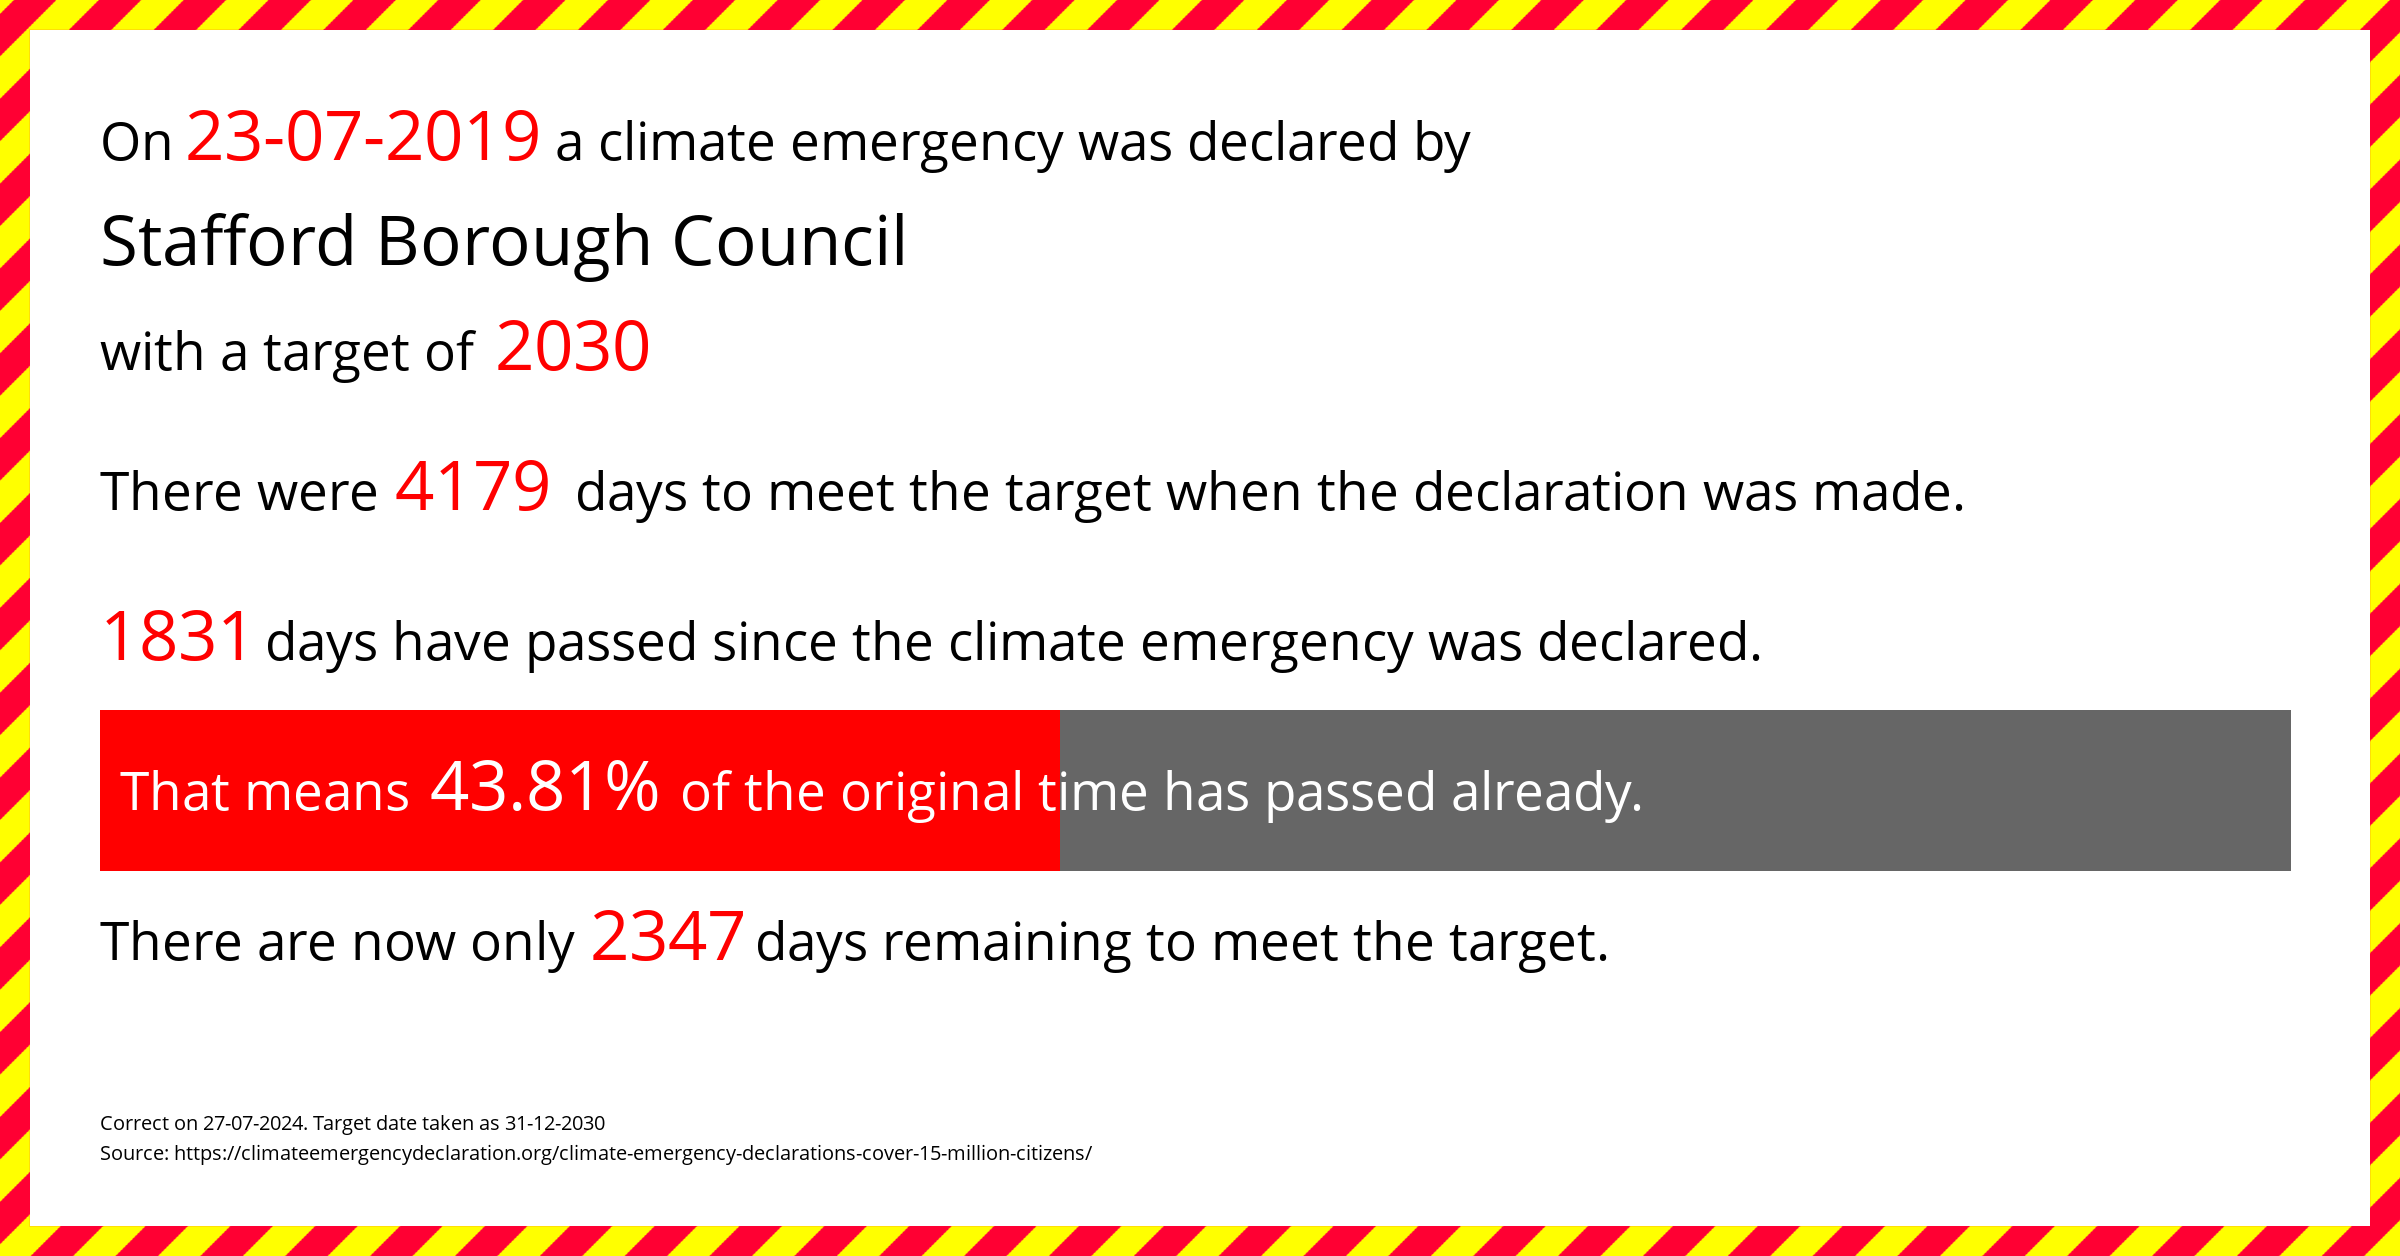 Stafford Borough Council declared a Climate emergency on Tuesday 23rd July 2019, with a target of 2030.